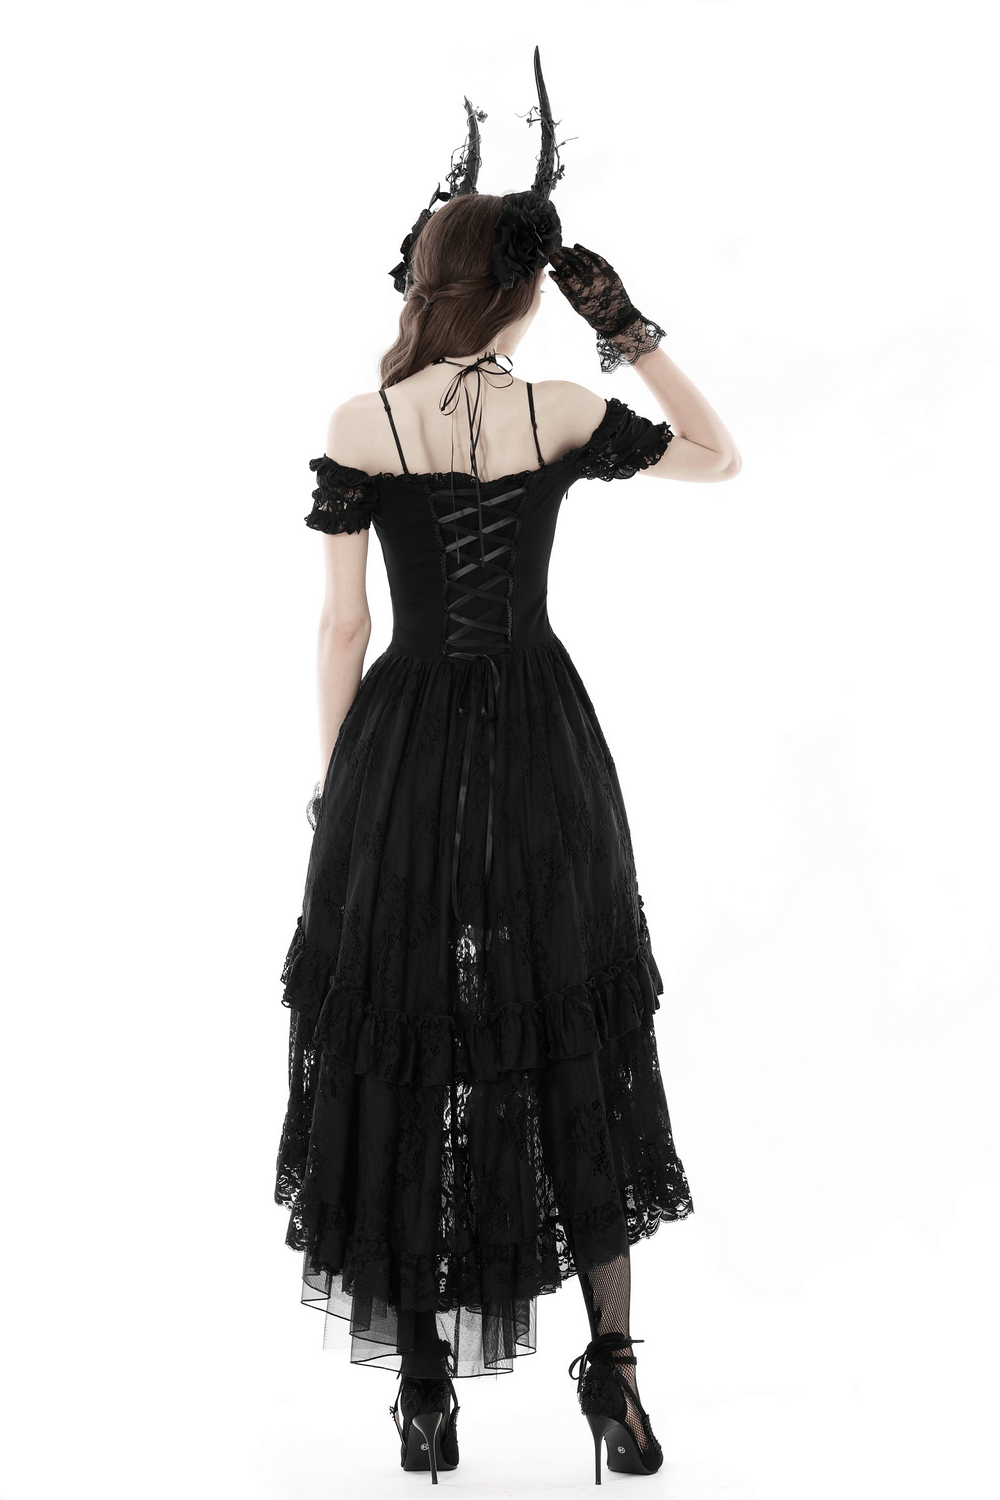 Lace Off-Shoulder High-Low Gothic Dress With Asymmetrical Hem